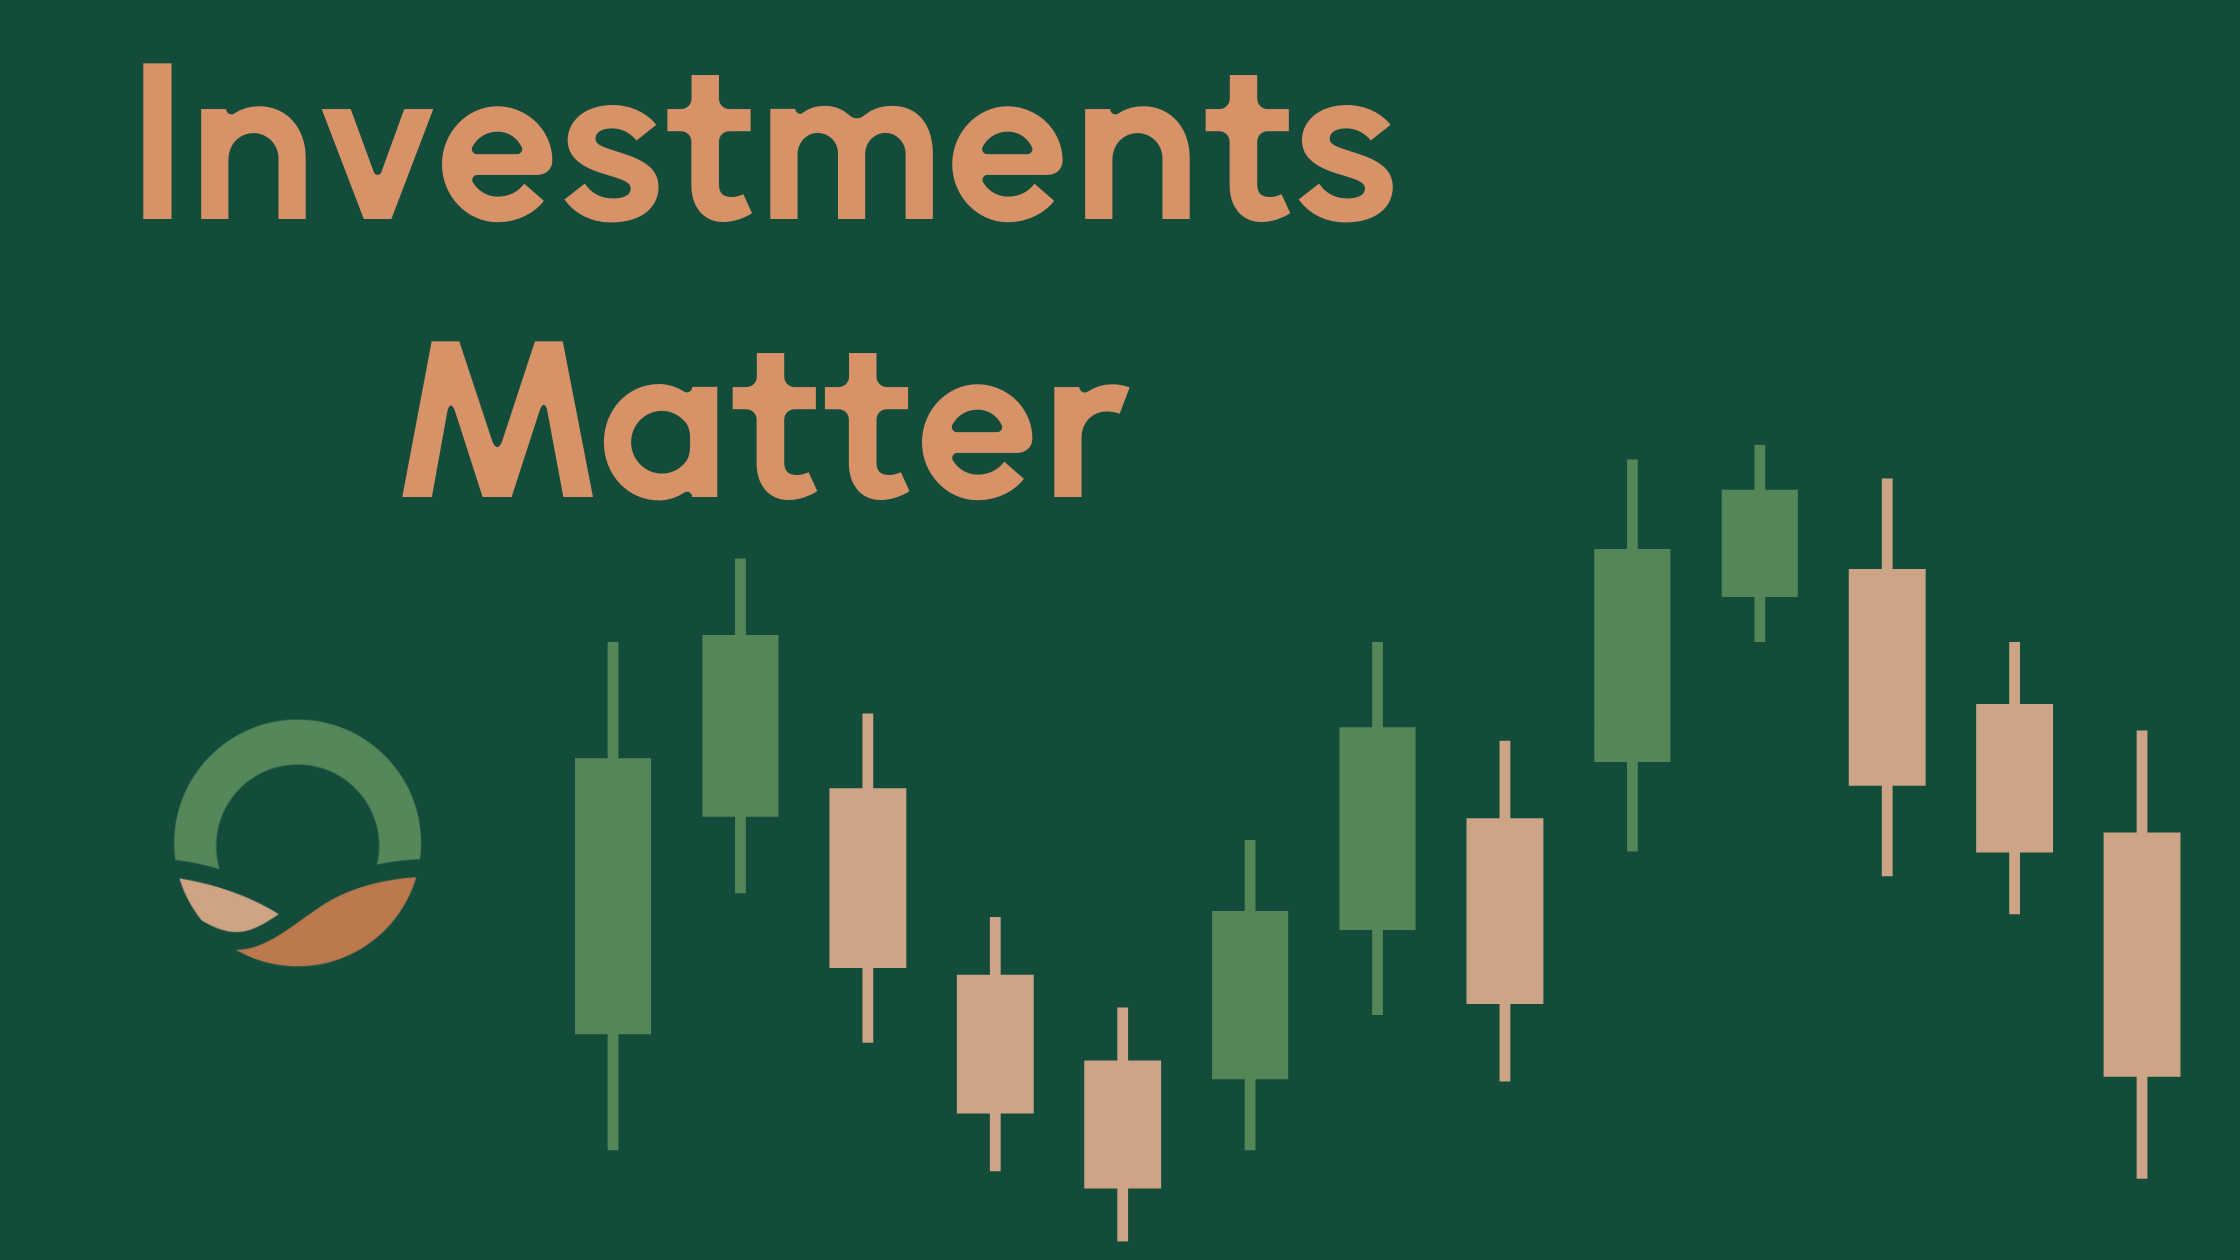 Investments Matter